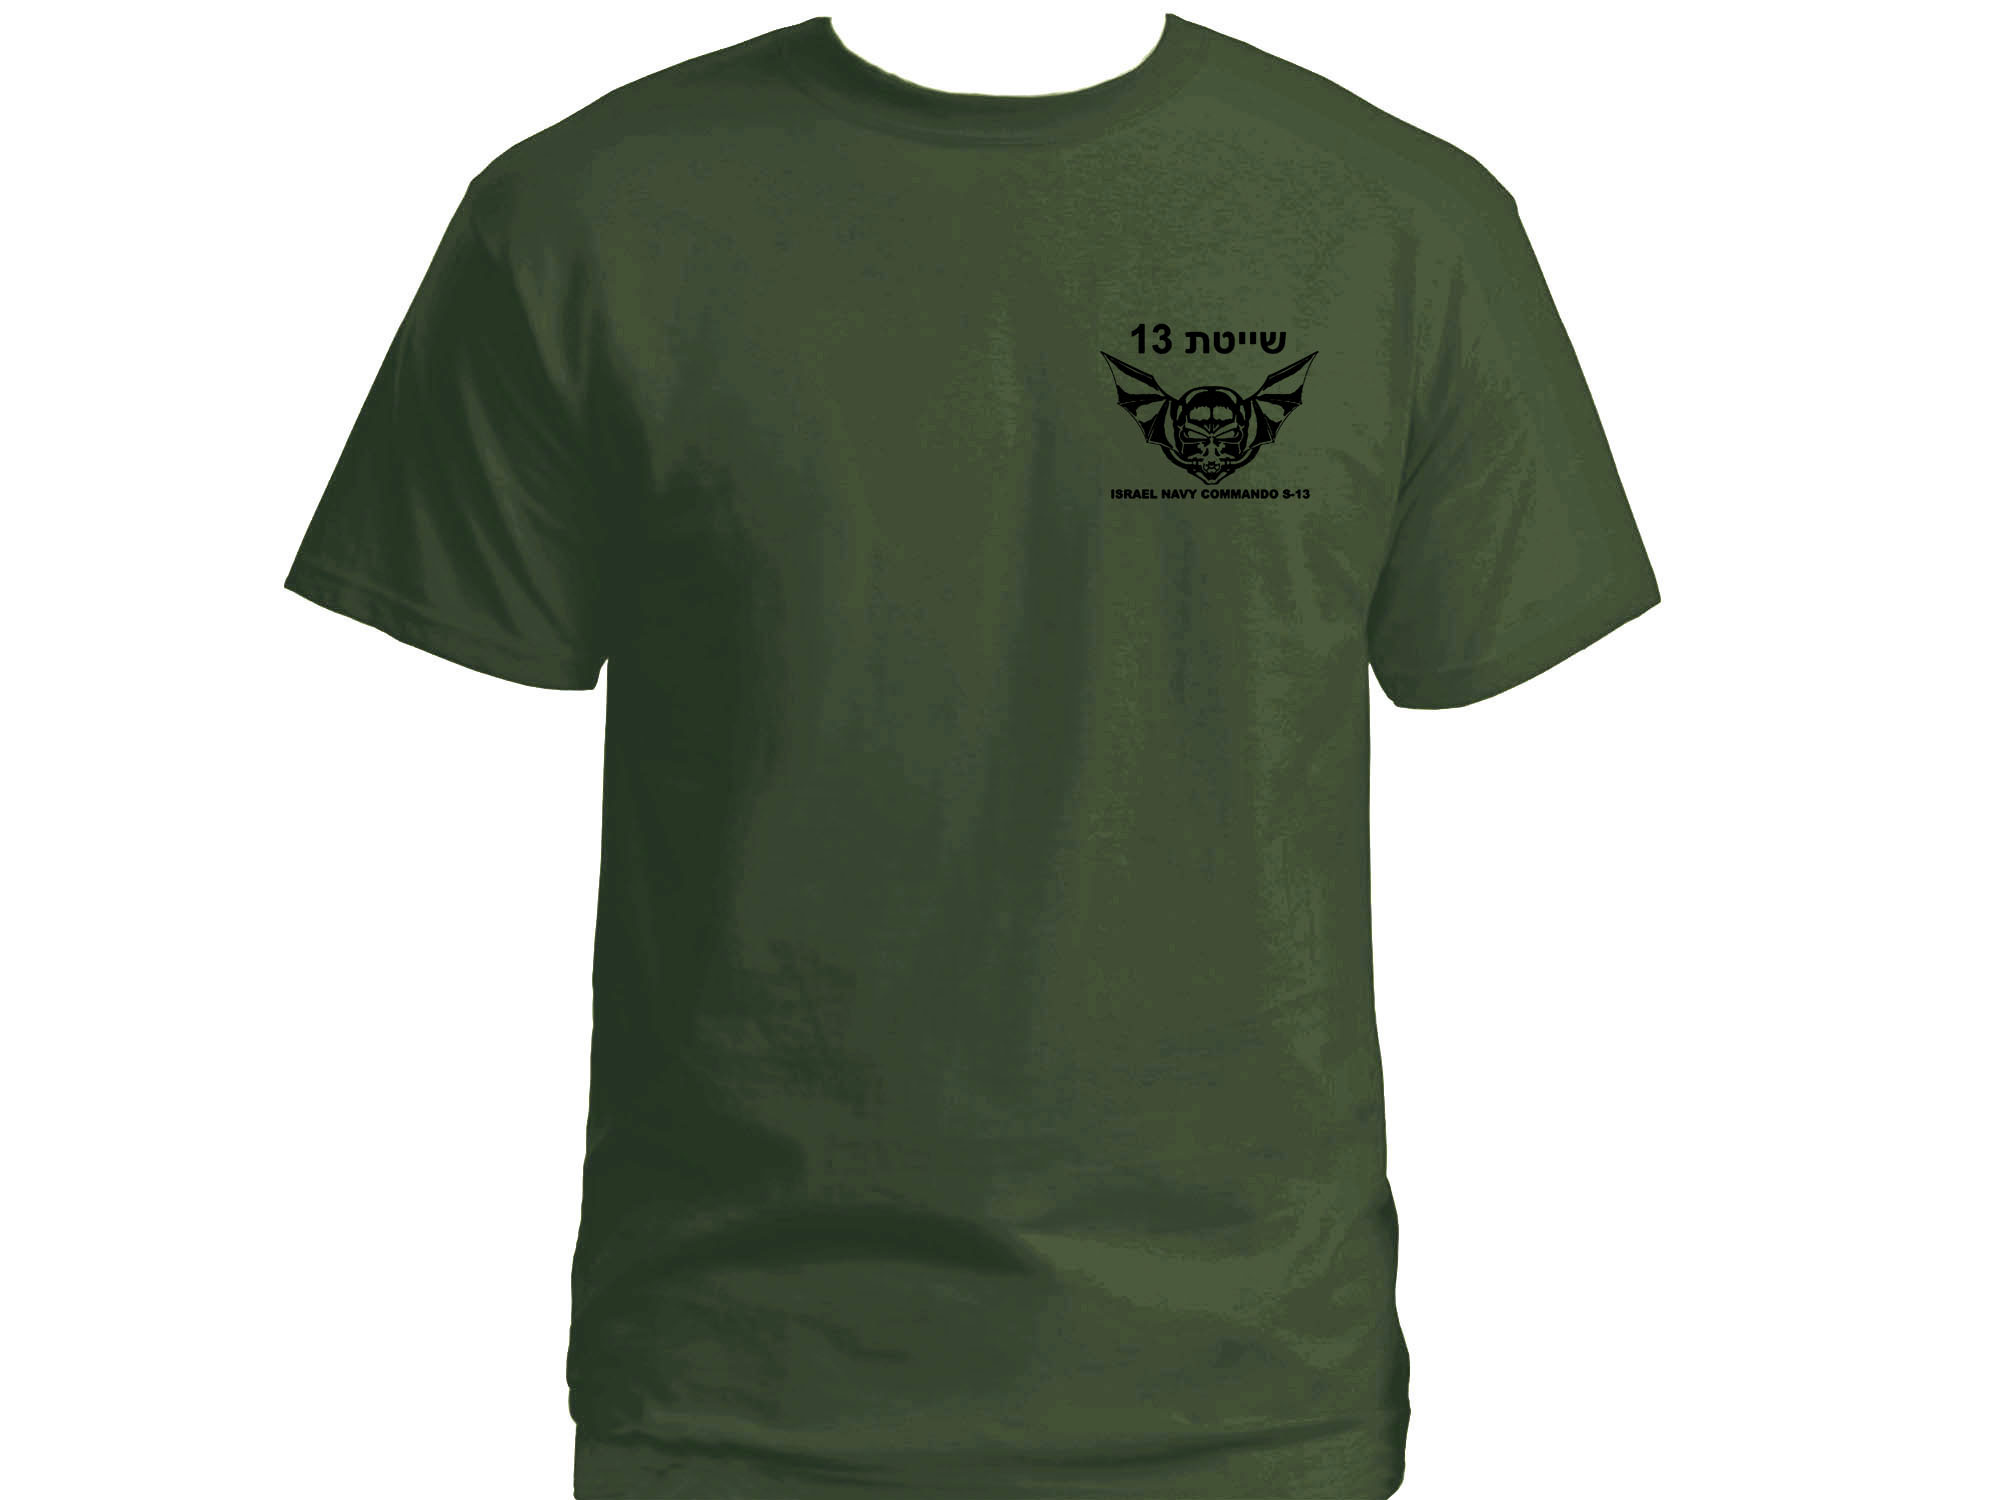 Israel army special force shayetet 13 customized t shirt 3